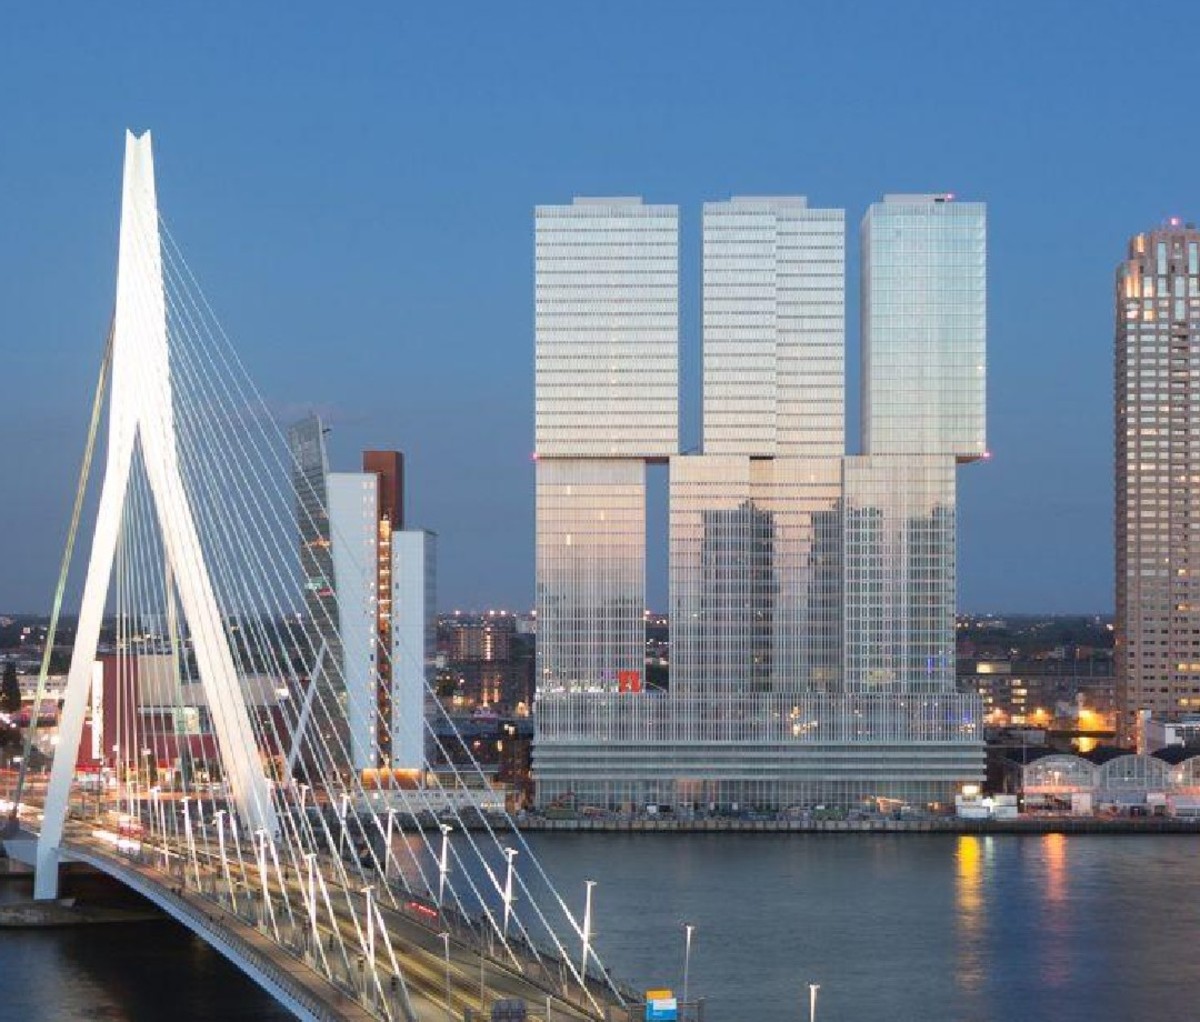 A view of the Nhow Rotterdam in Rotterdam, Netherlands.